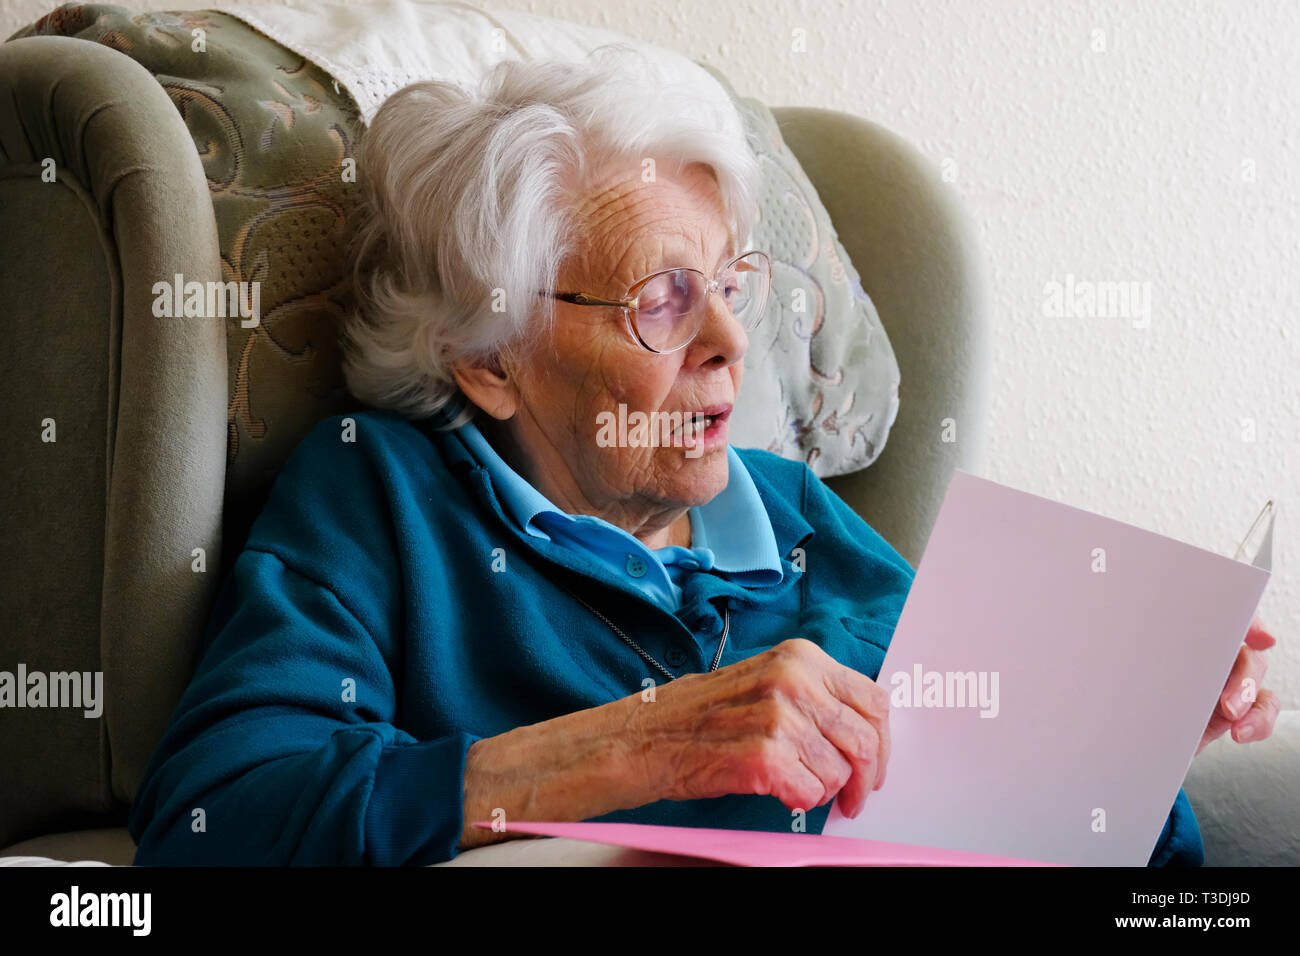 Real life image of an elderly woman reading a greetings card - John Gollop Stock Photo